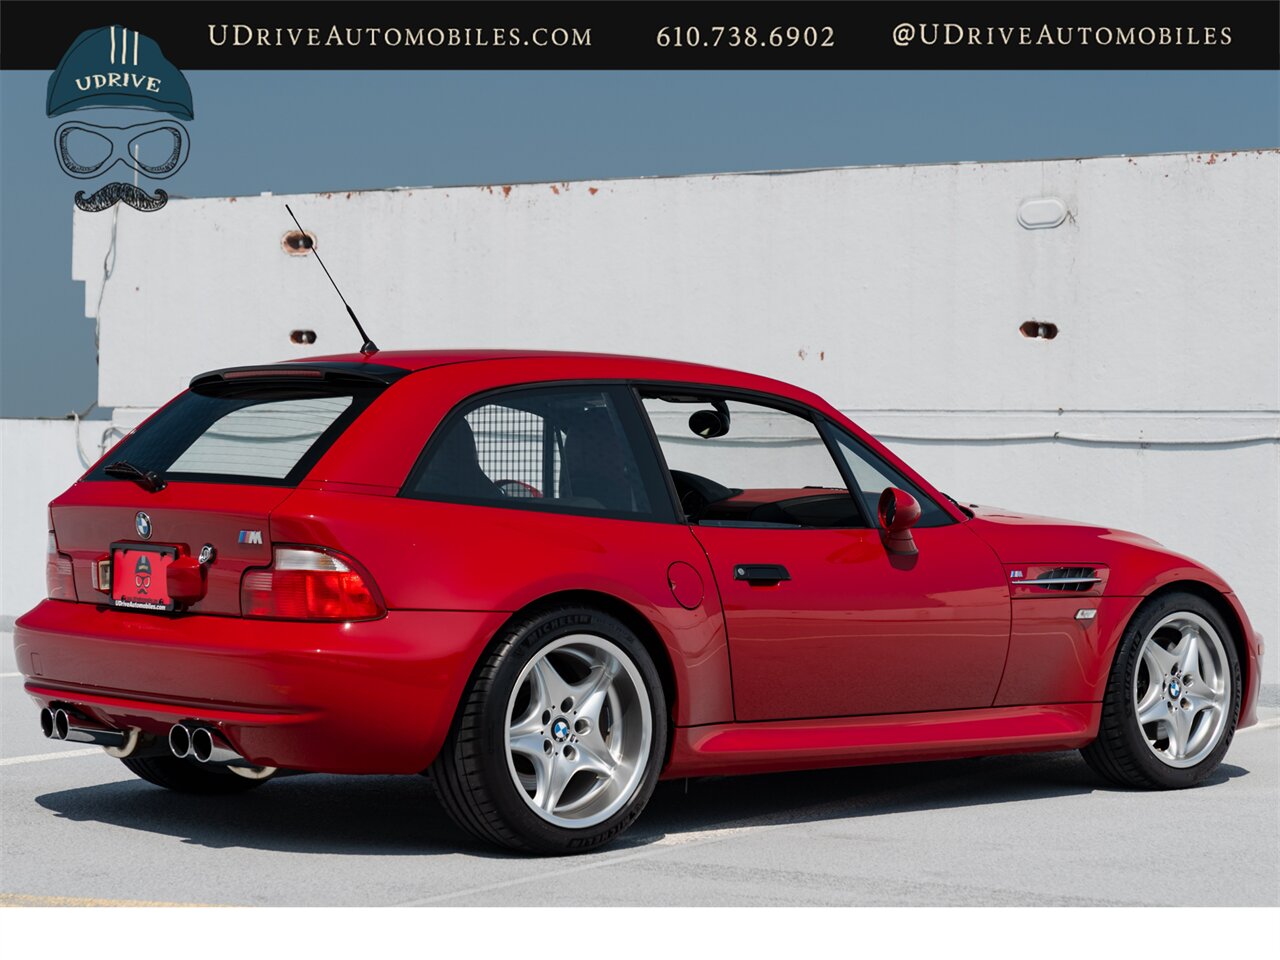 2000 BMW Z3 M  Coupe 25k Miles  Sunroof Delete $4k Recent Service - Photo 19 - West Chester, PA 19382